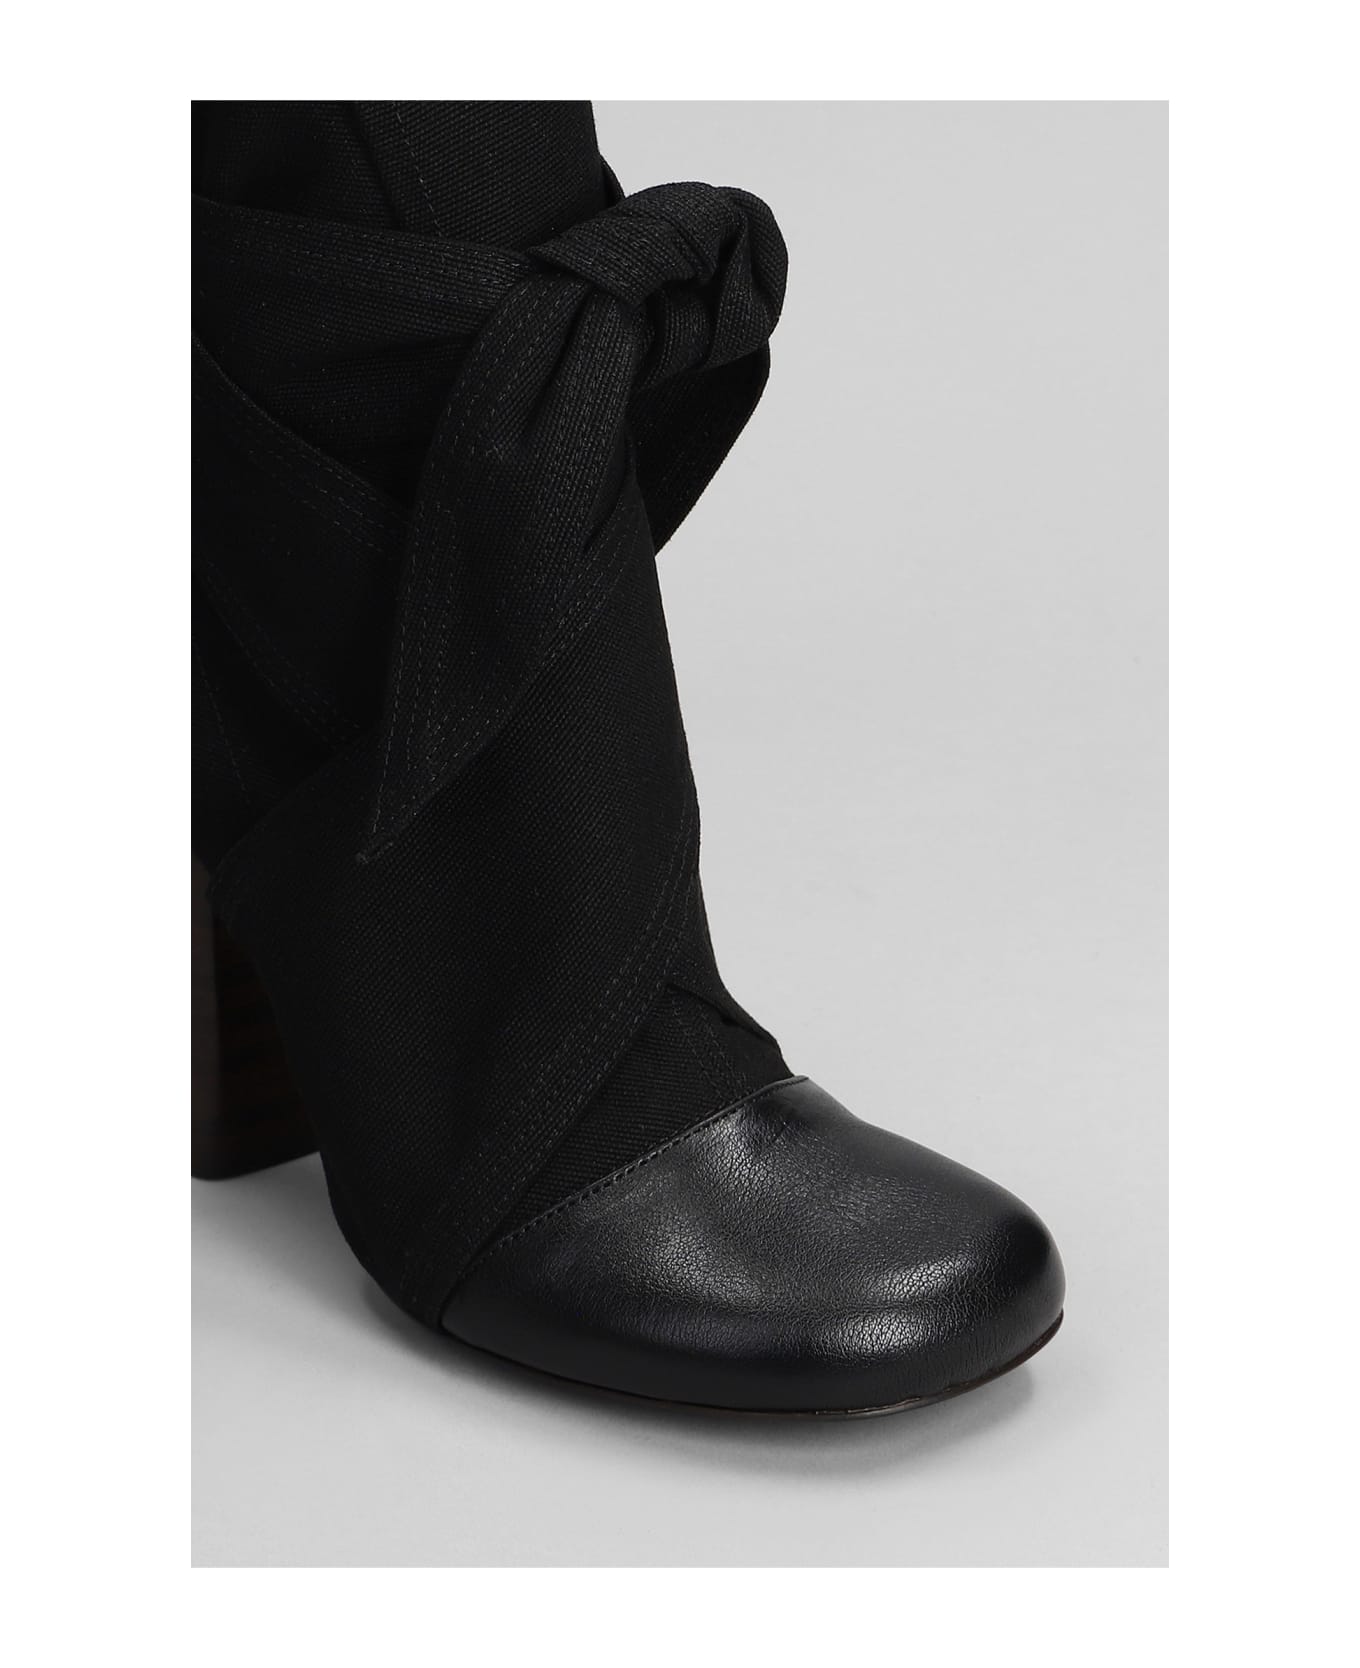 Lemaire High Heels Ankle Boots In Black Fabric - black